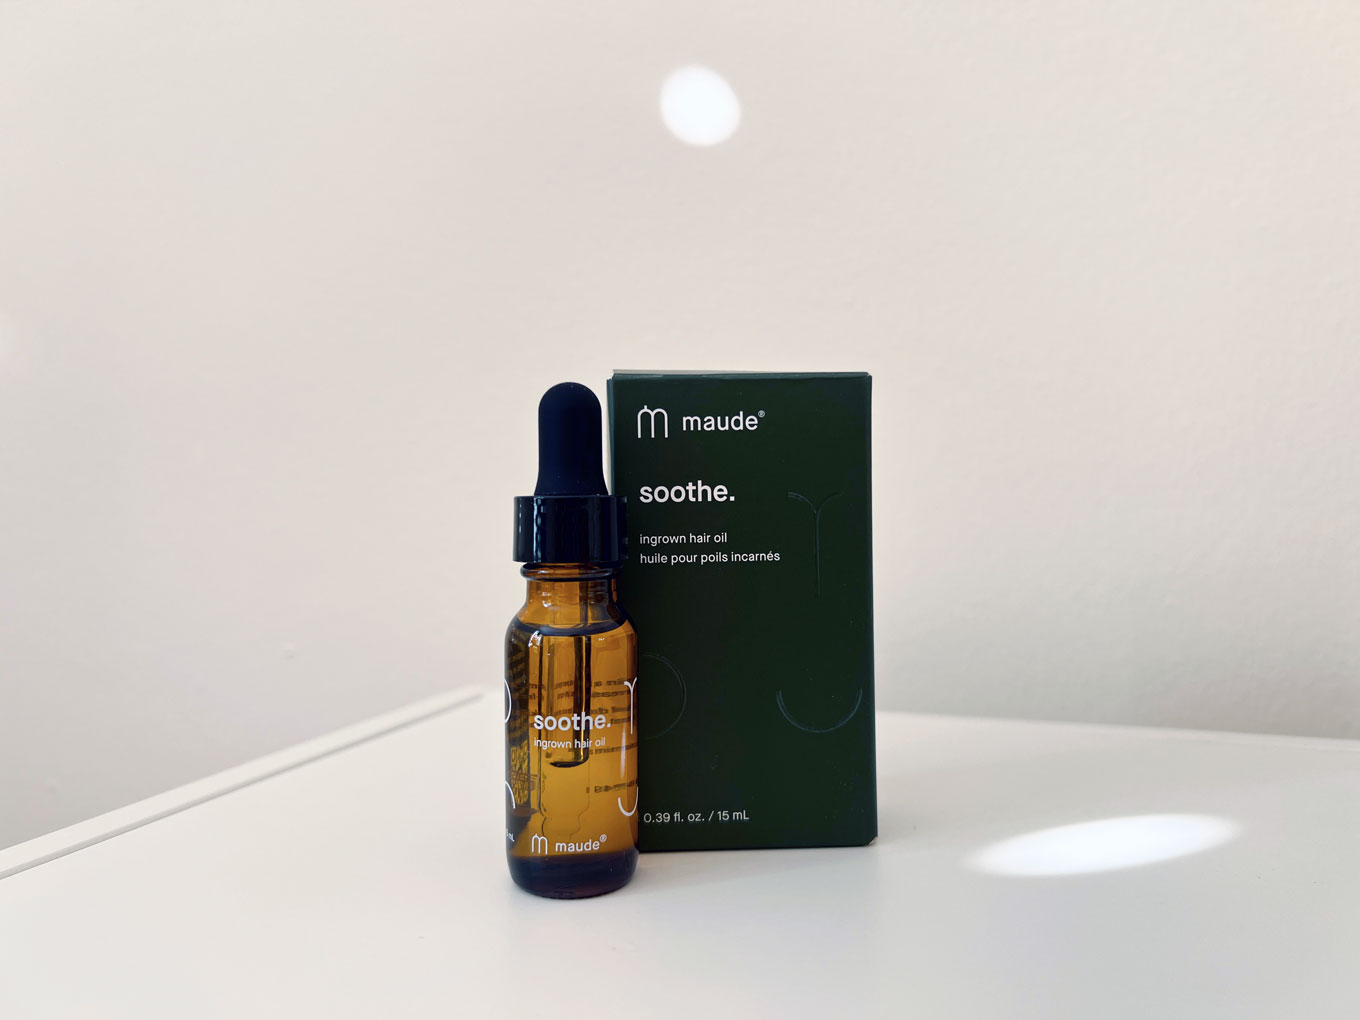 A bottle of Soothe from Maude sits on a countertop, next to a box